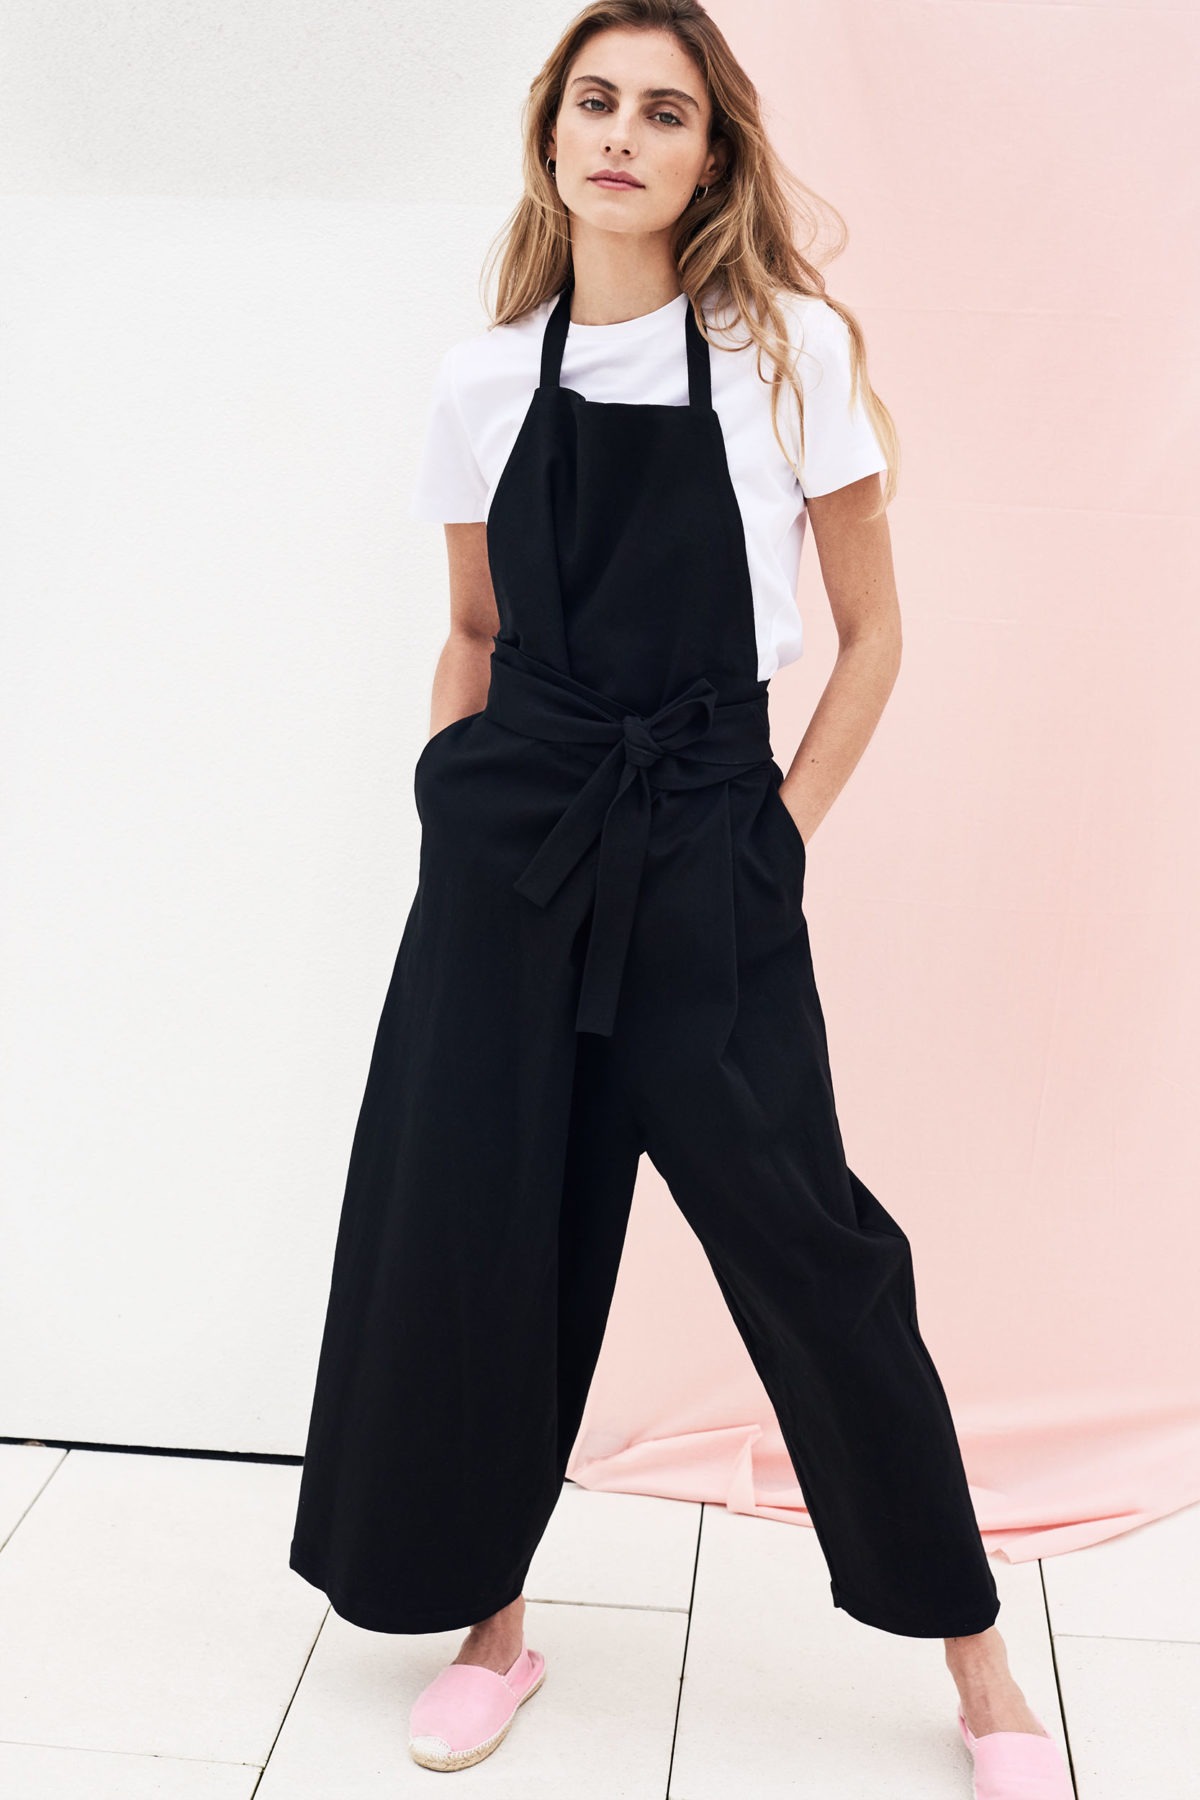 KINO Jumpsuit - Roxane Baines – Official website